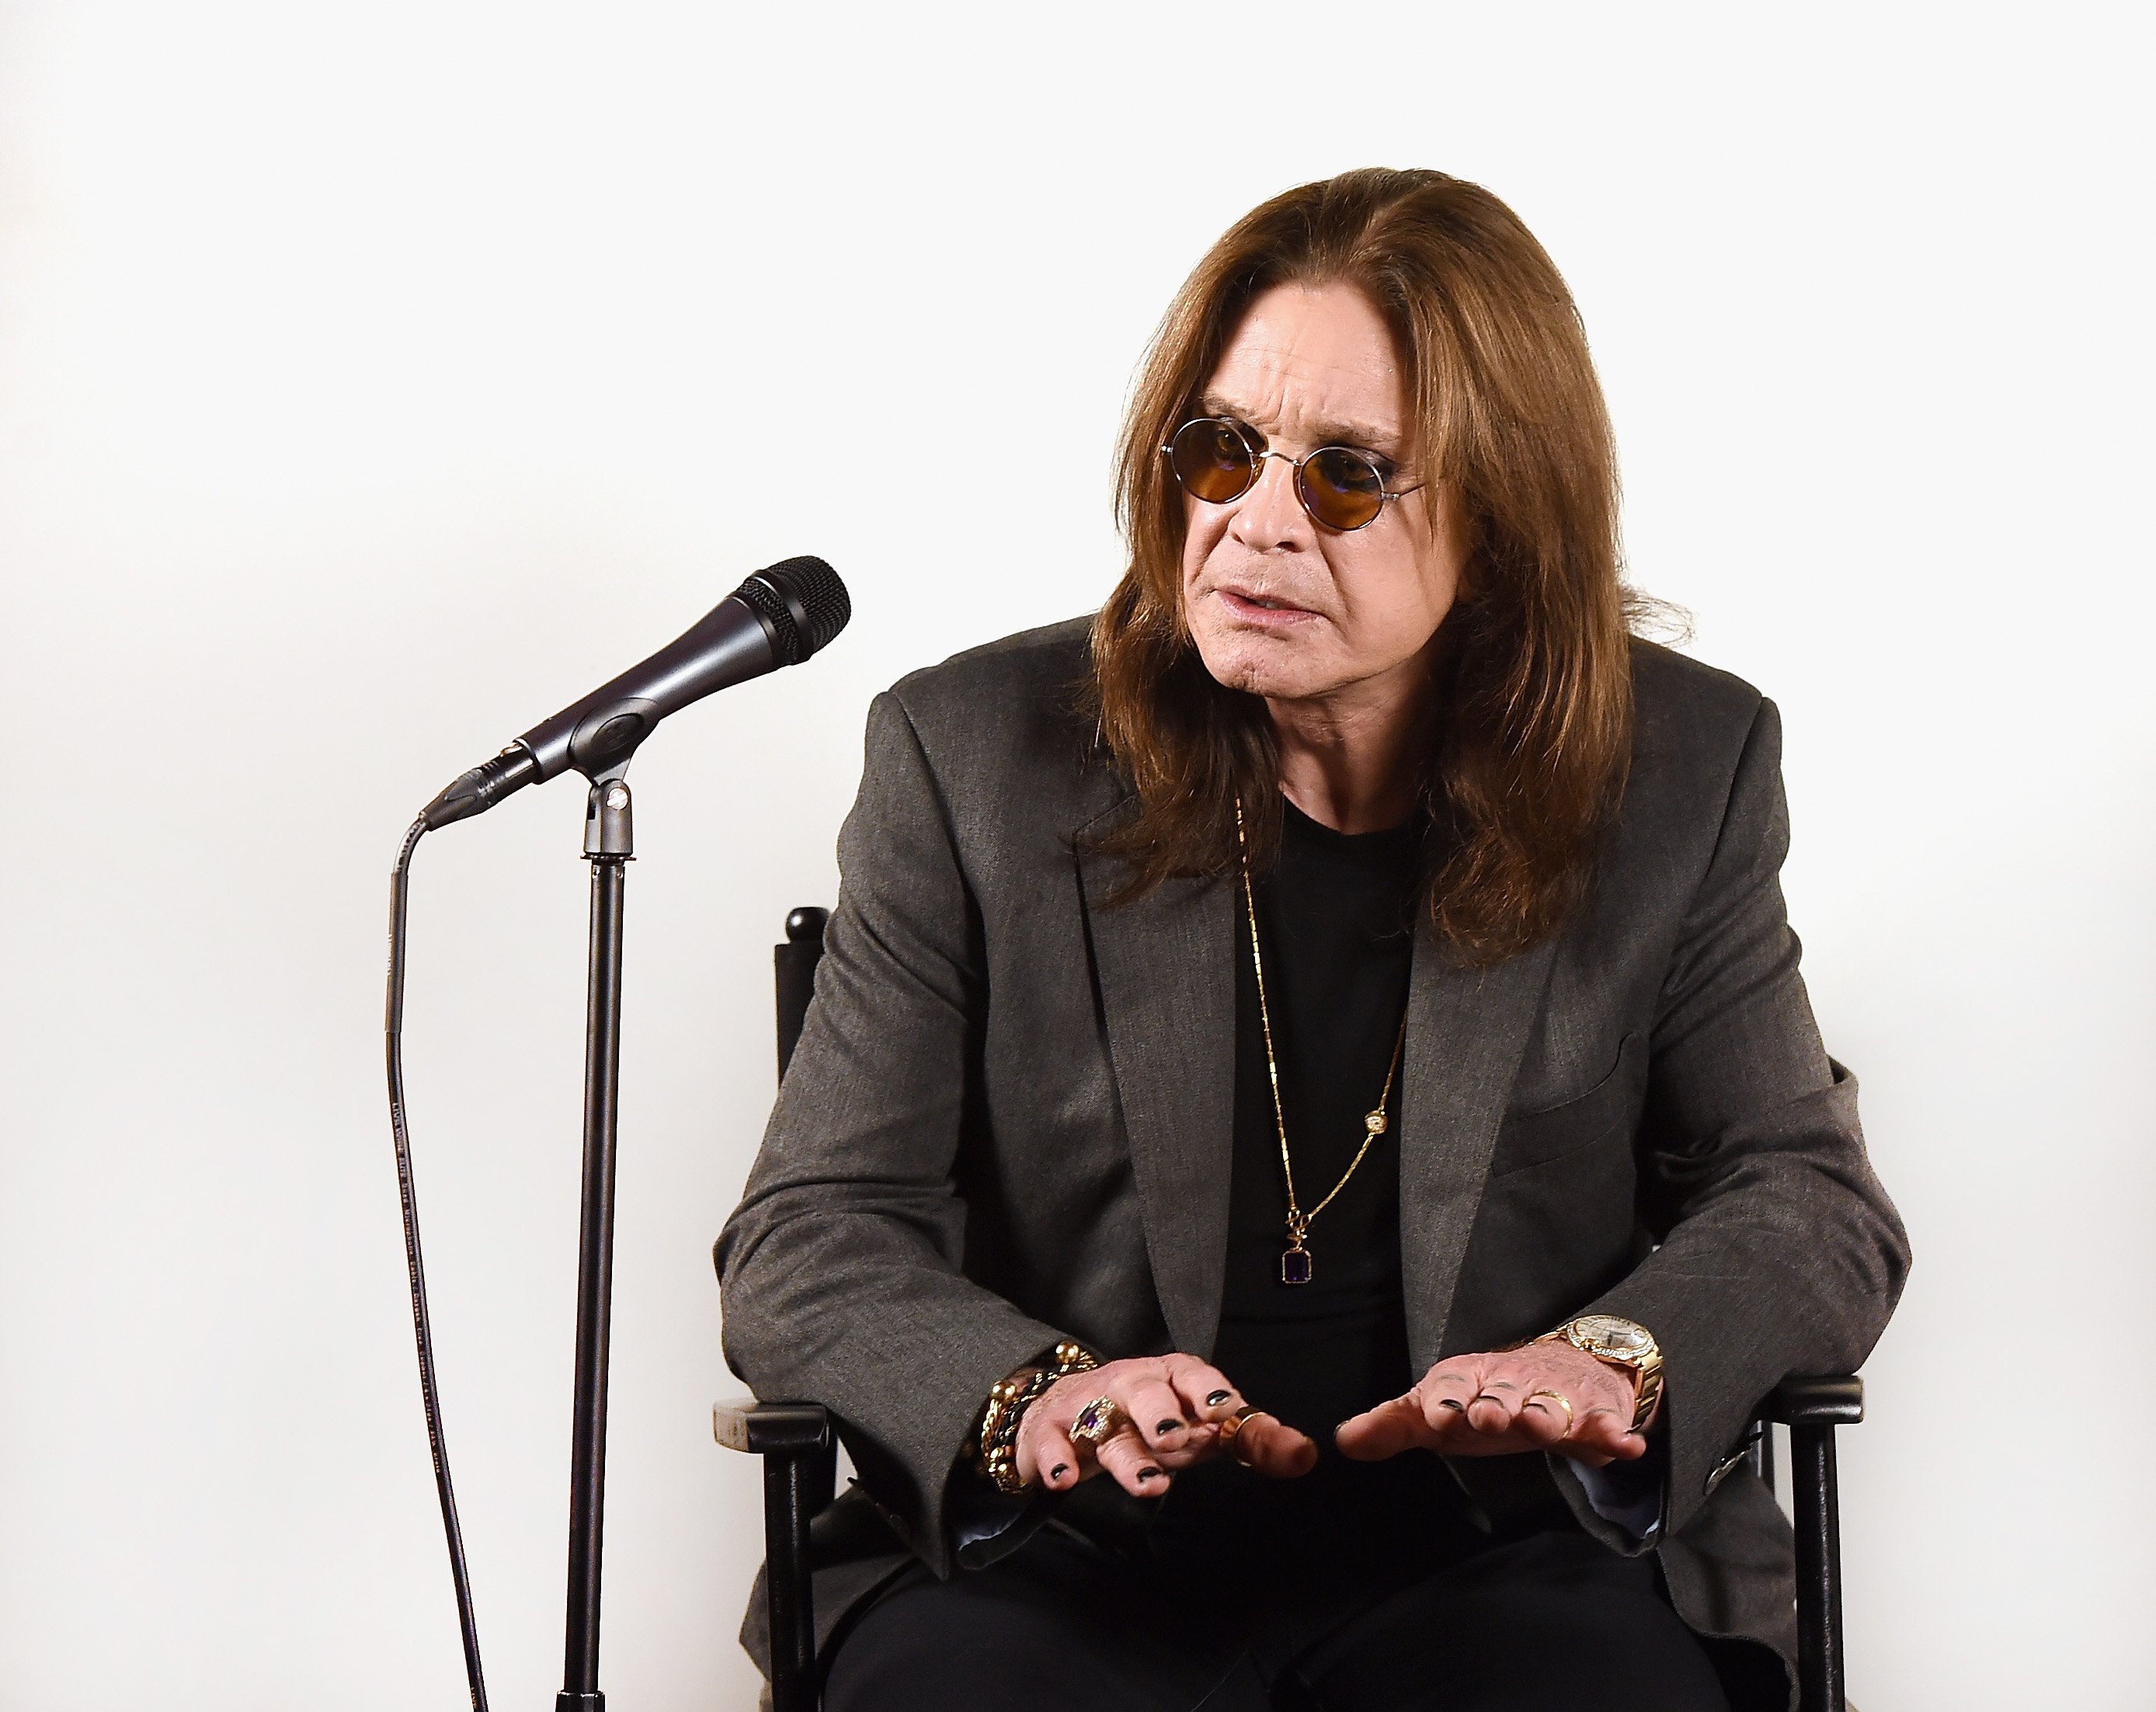 Ozzy Osbourne announces his "No More Tours 2" Final World Tour at a press conference at his Los Angeles home on February 6, 2018 | Source: Getty Images